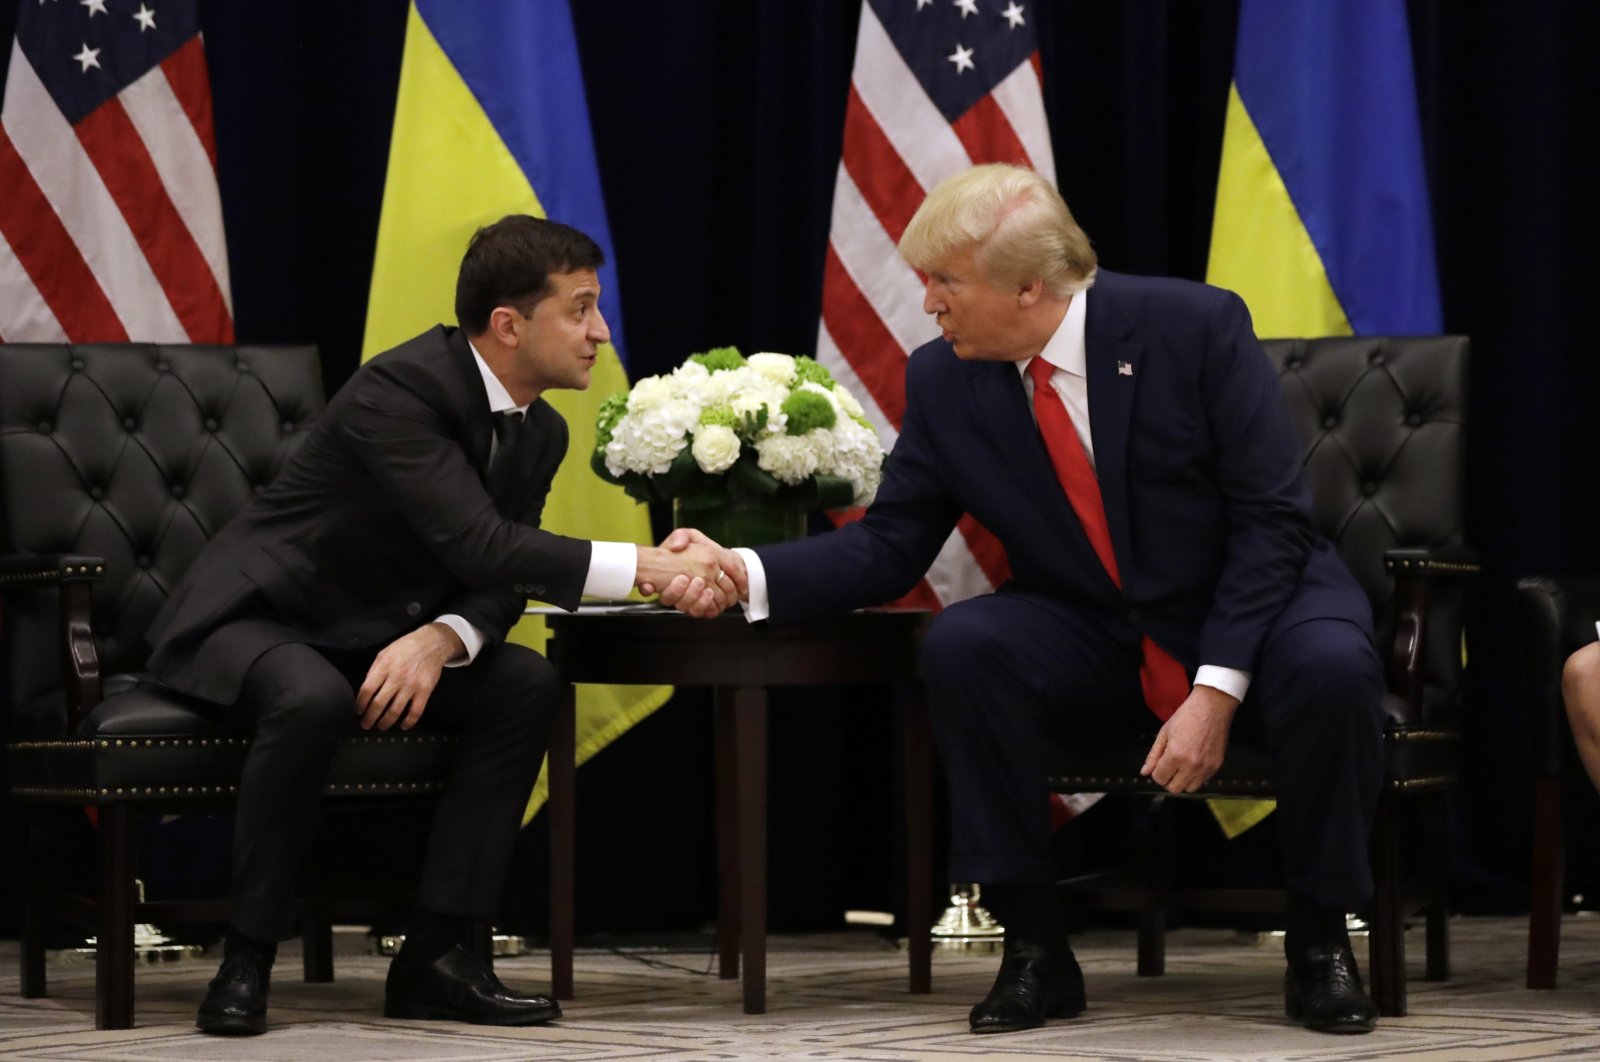 Then-U.S. President Donald Trump meets with Ukrainian President Volodymyr Zelenskyy at the InterContinental Barclay New York hotel during the United Nations General Assembly in New York, the U.S., Sept. 25, 2019. (AP File Photo)